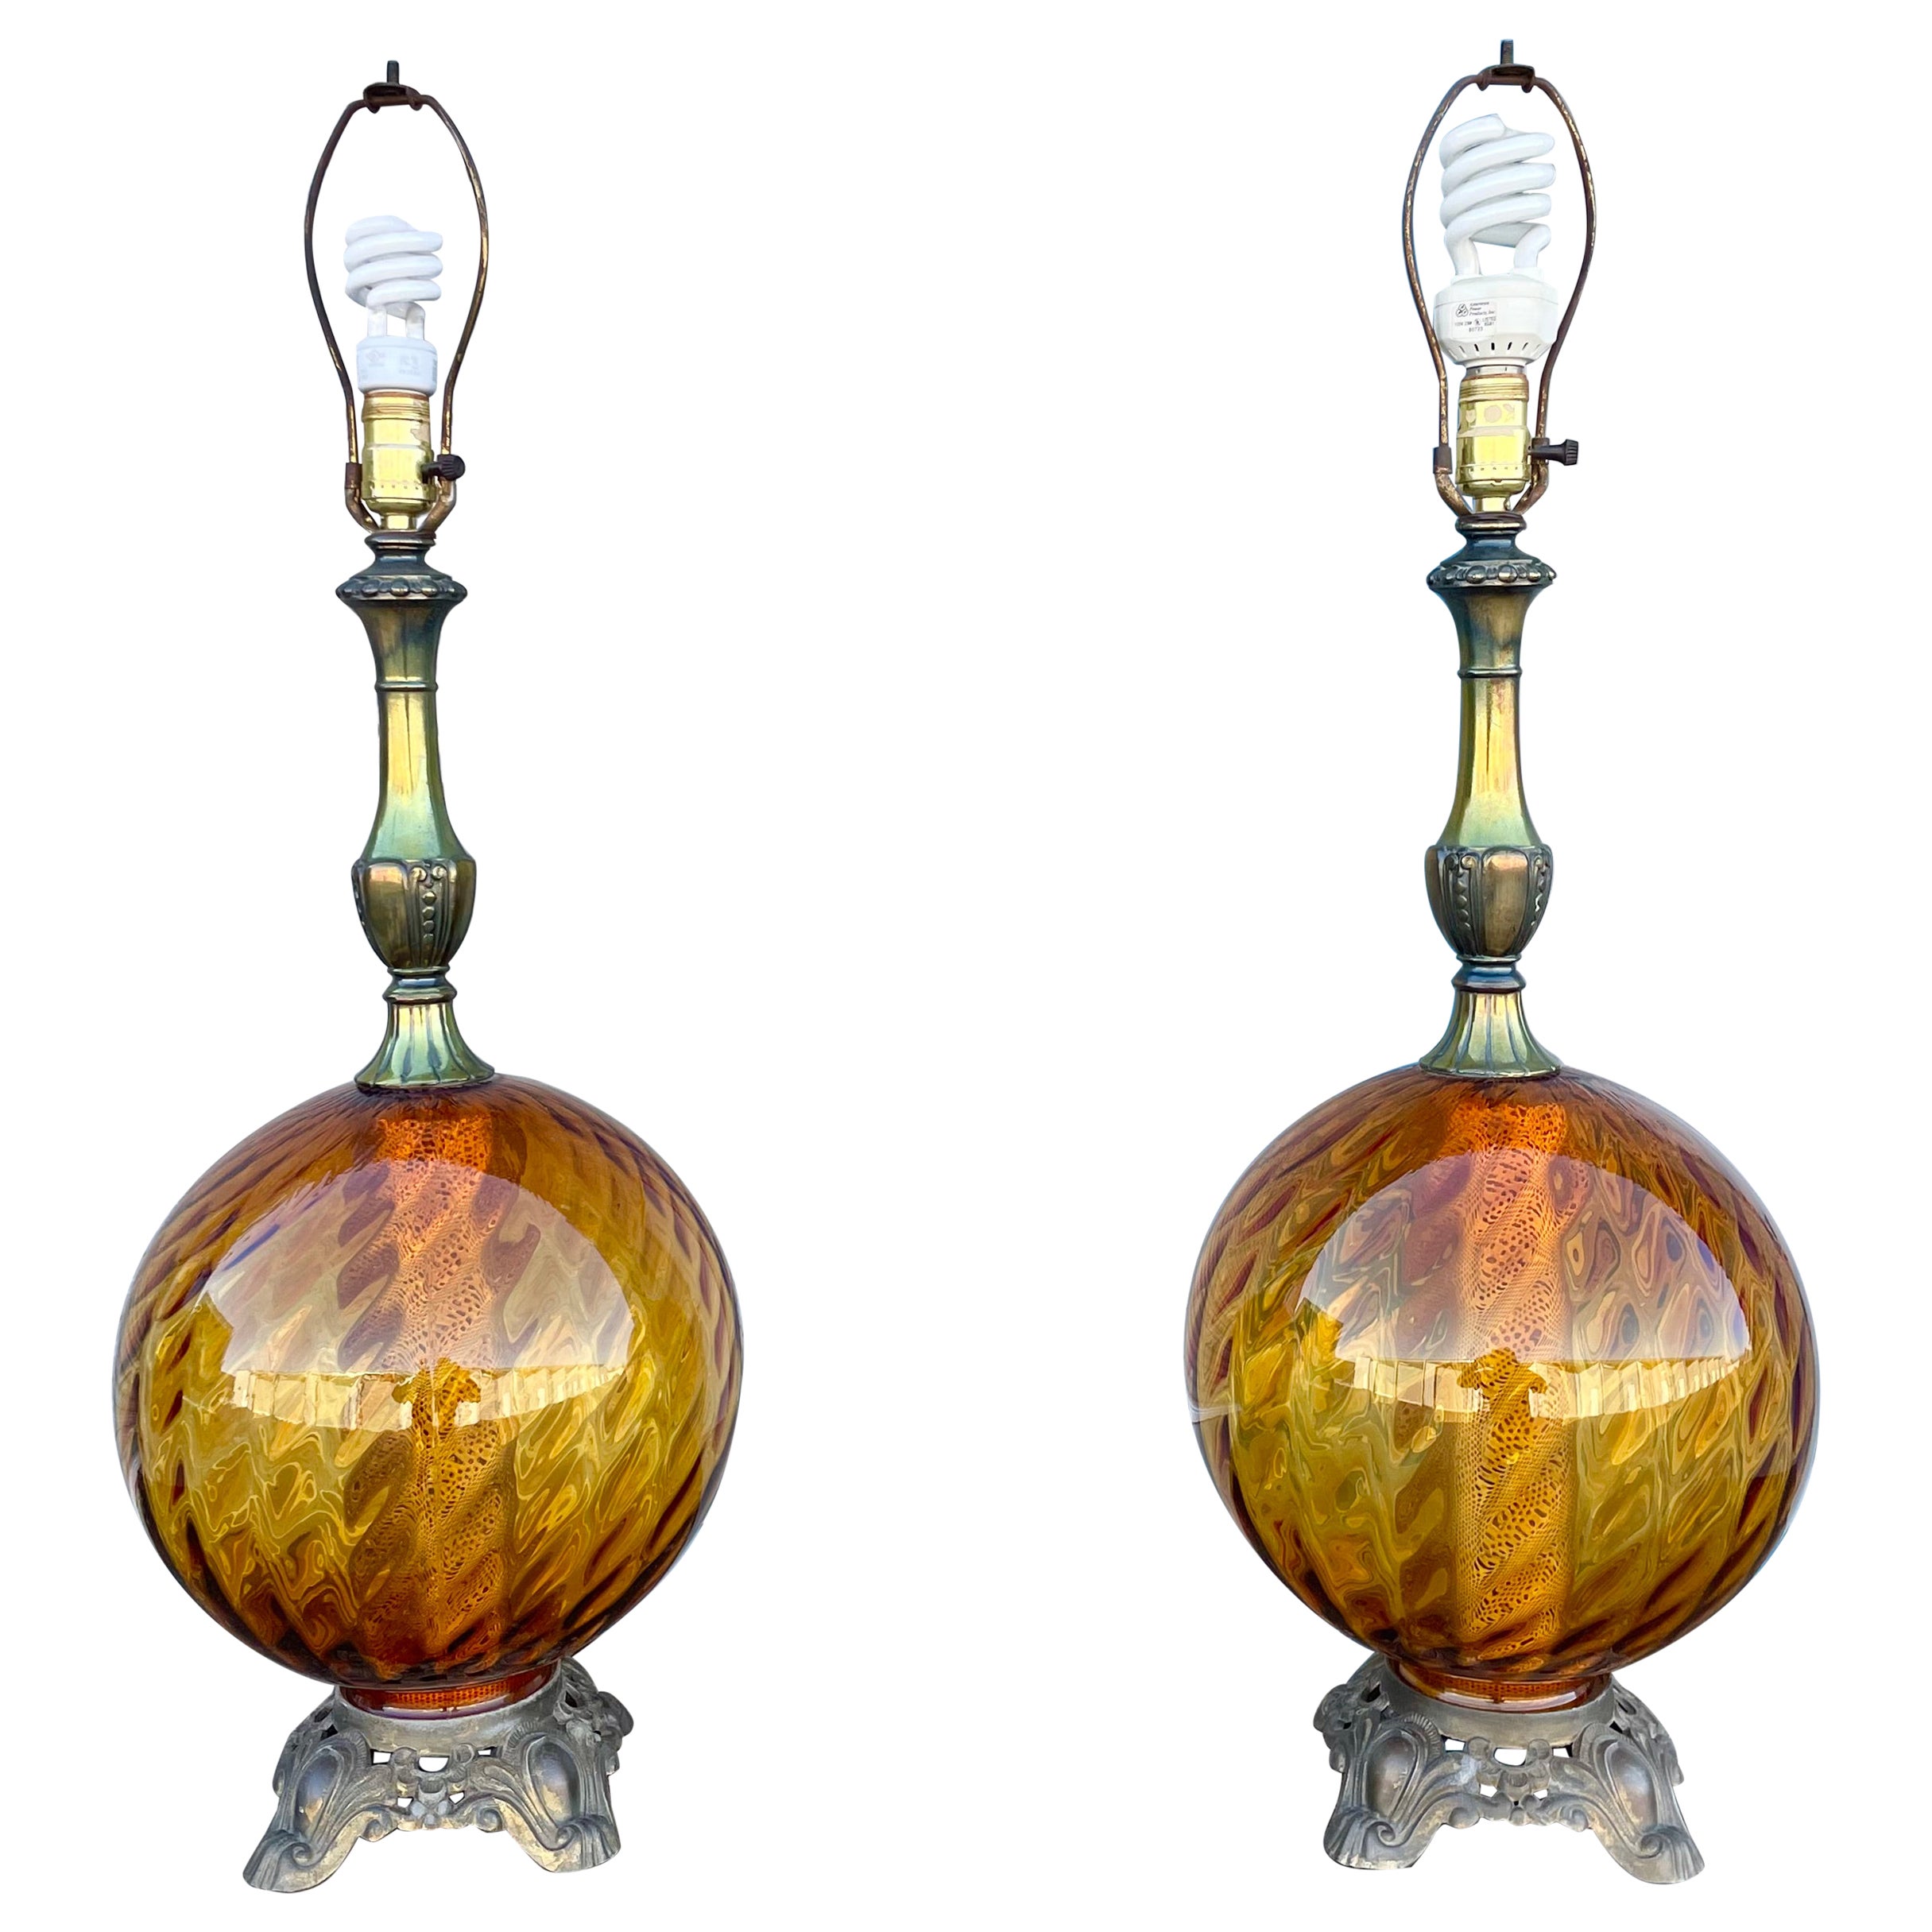 1970s Vintage Glass Sphere Lamps - a Pair For Sale